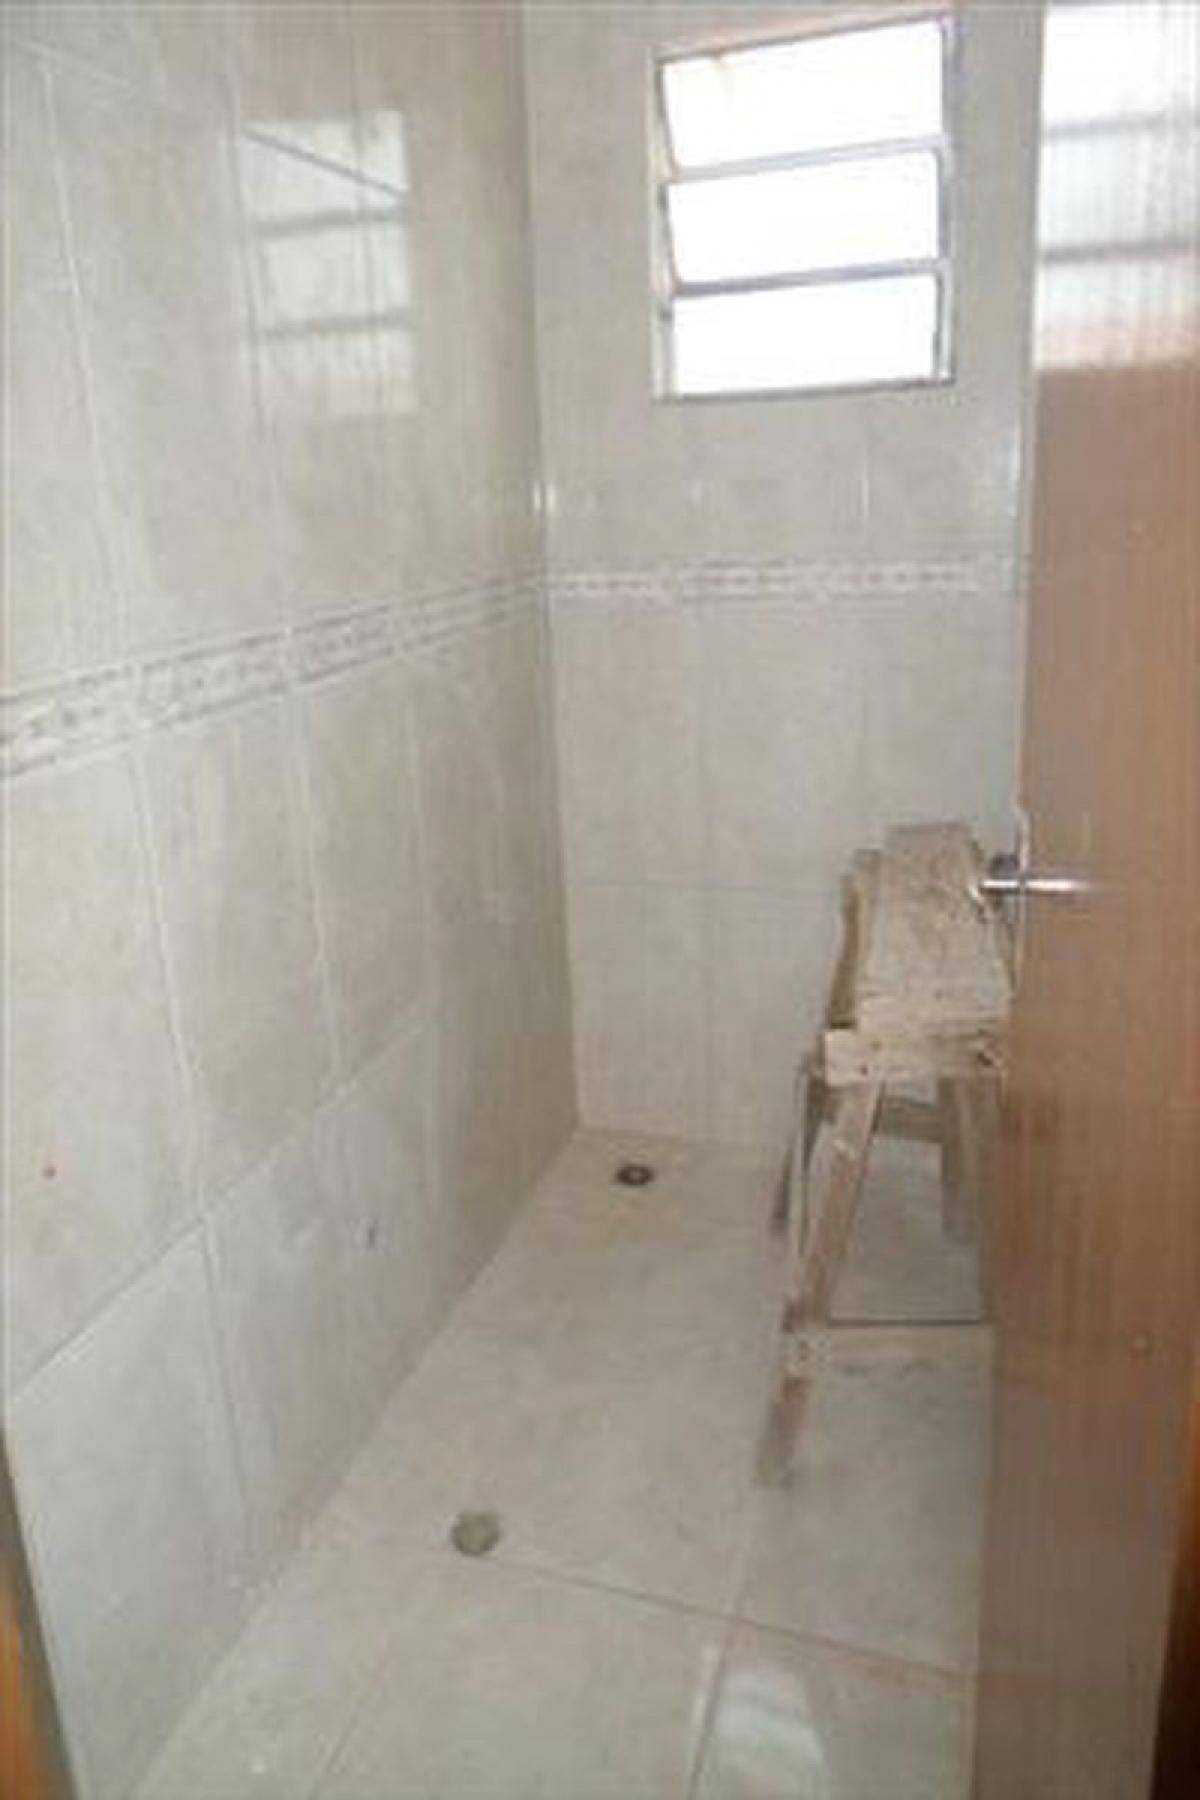 Picture of Townhome For Sale in Mongagua, Sao Paulo, Brazil